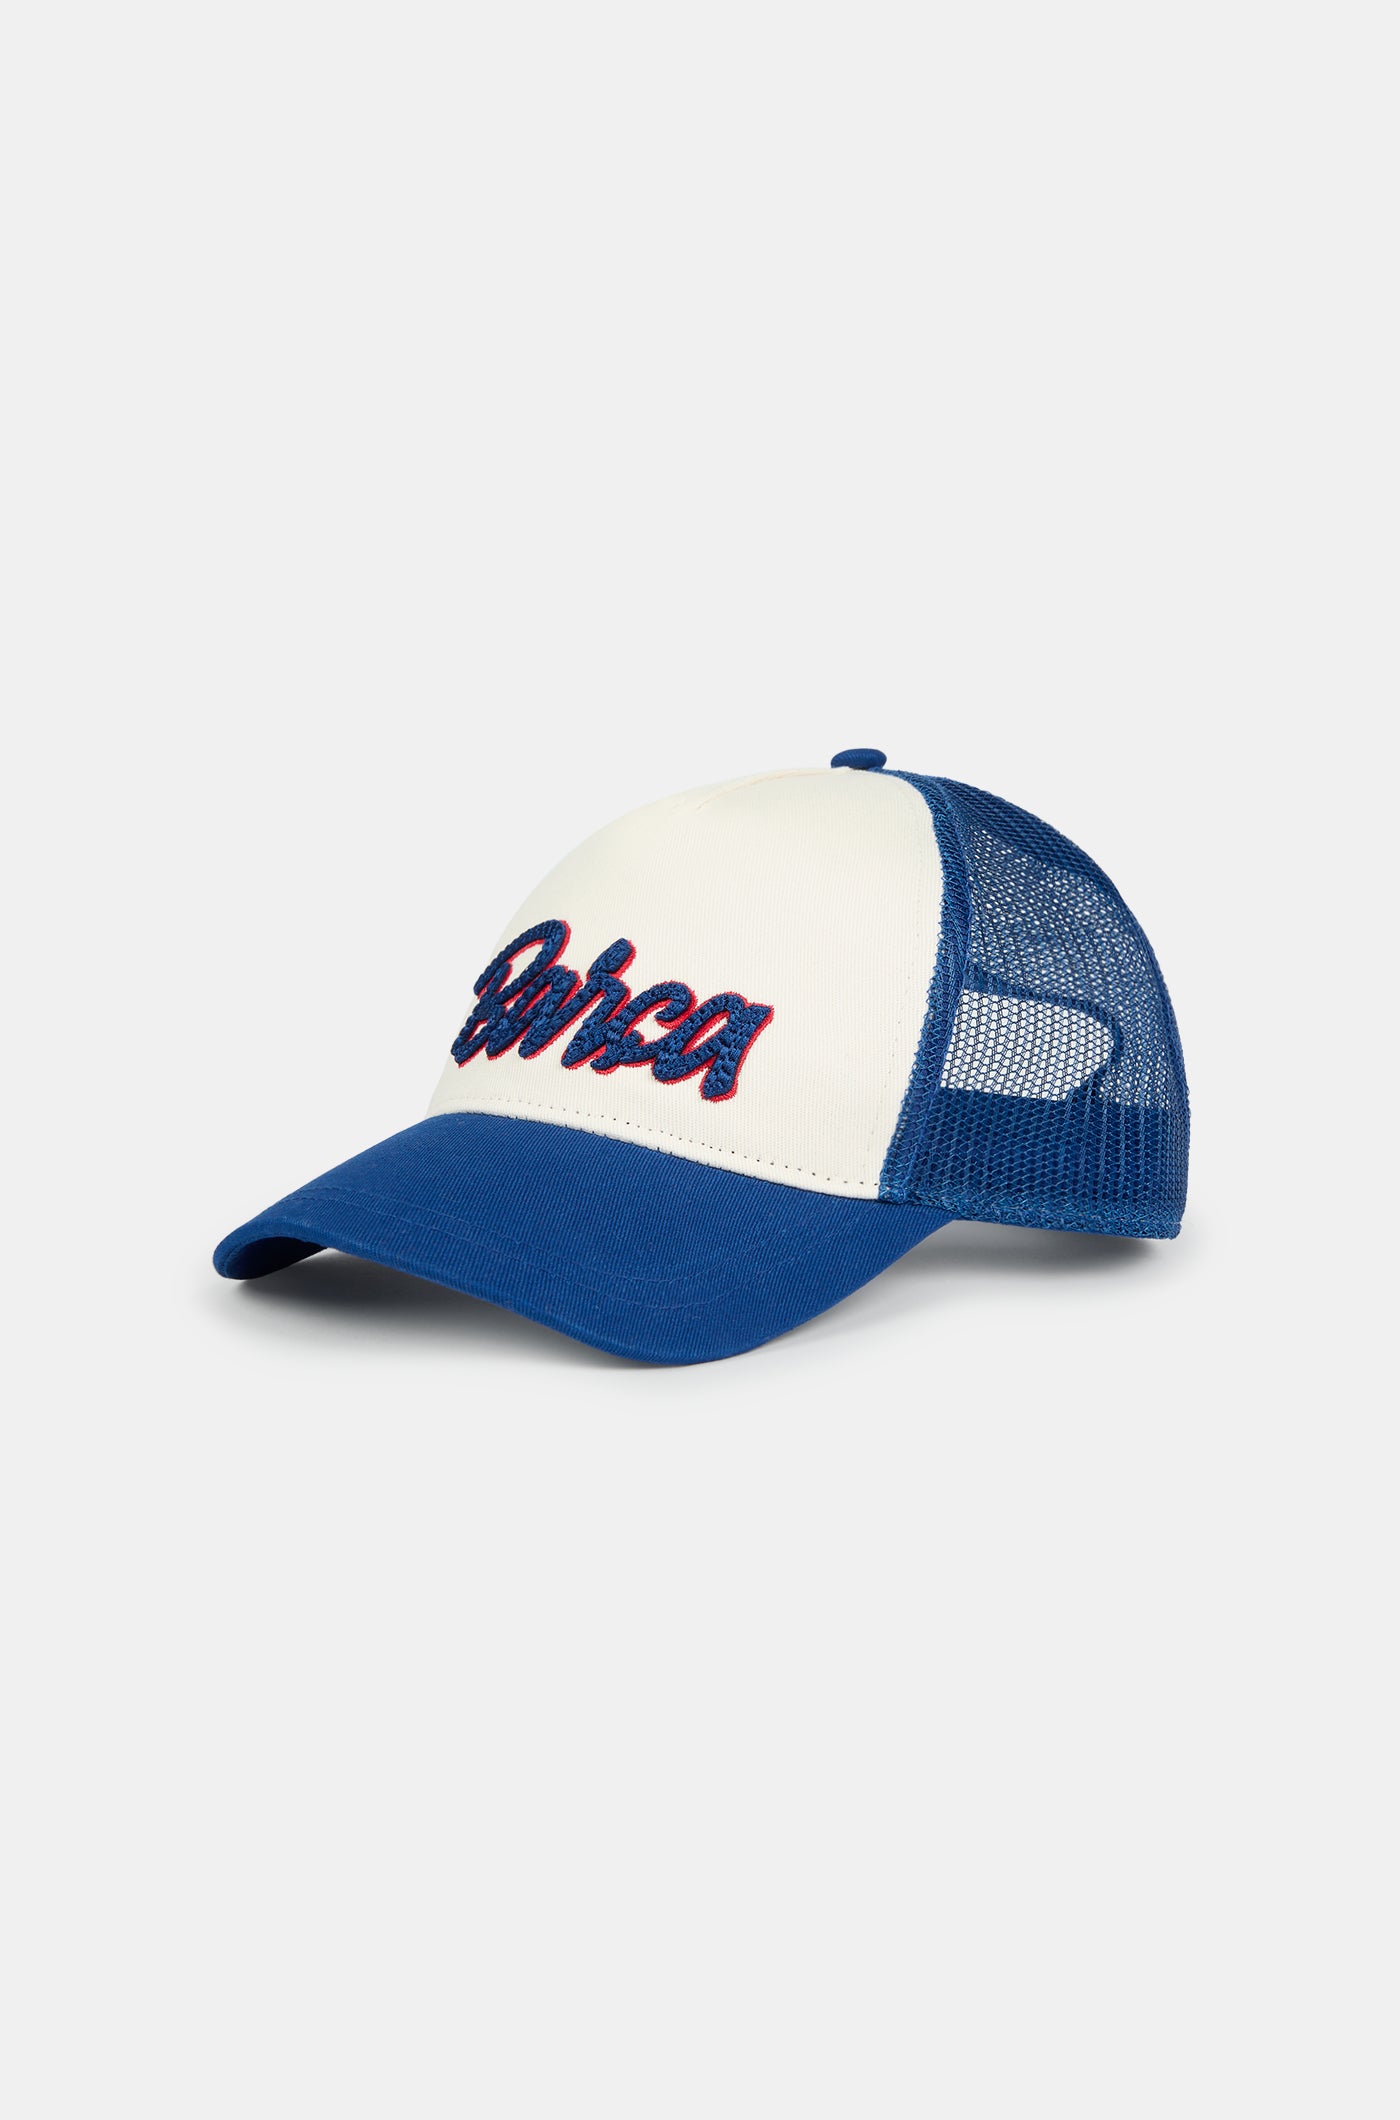 Cap with lettering "Barça"